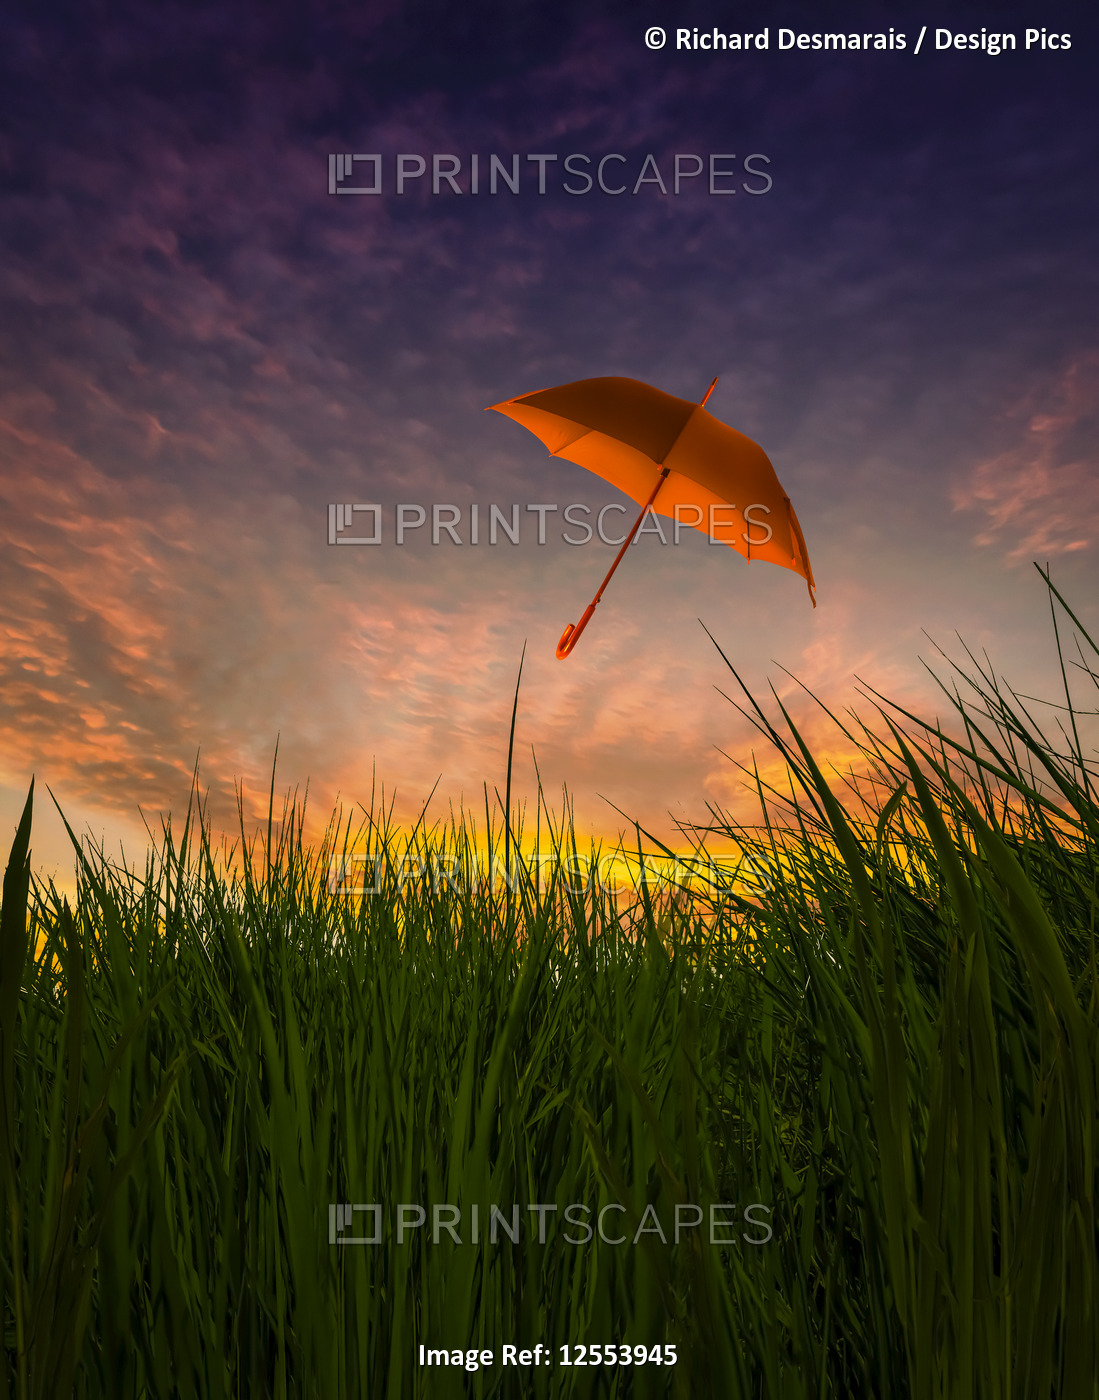 Composite image of an umbrella floating over grass at sunset